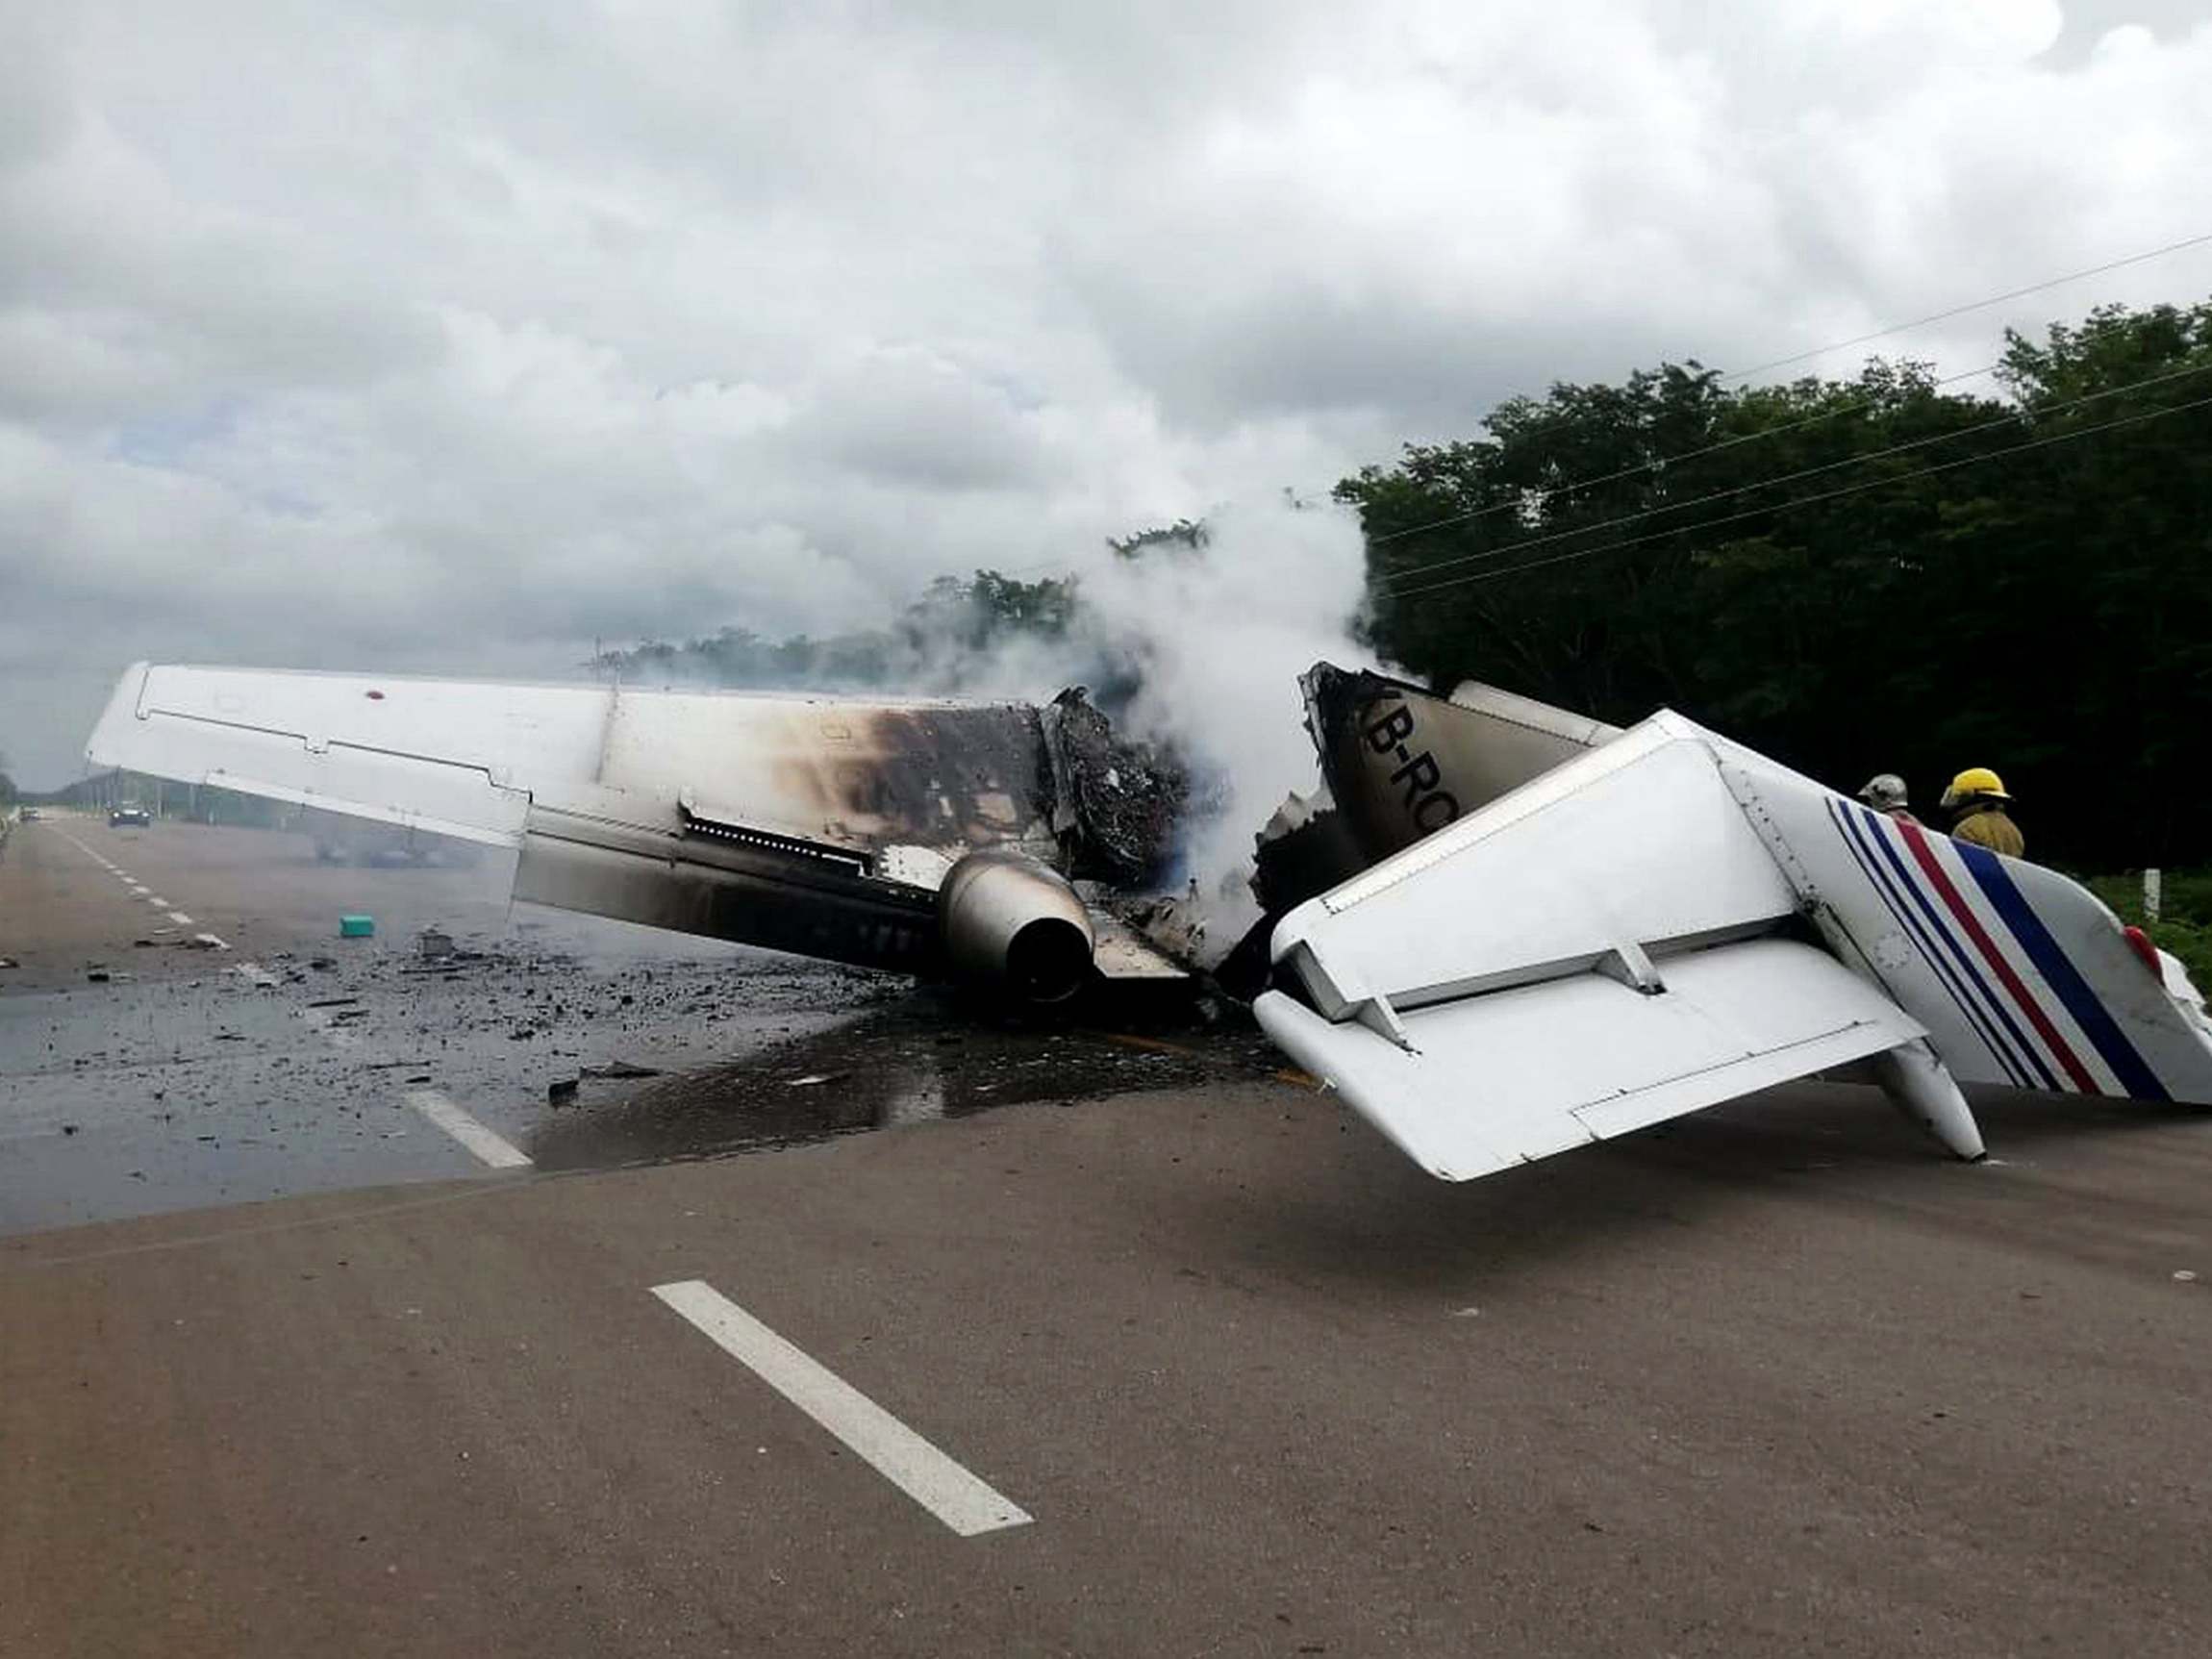 A plane has been found on fire in Mexico in the middle of a highway